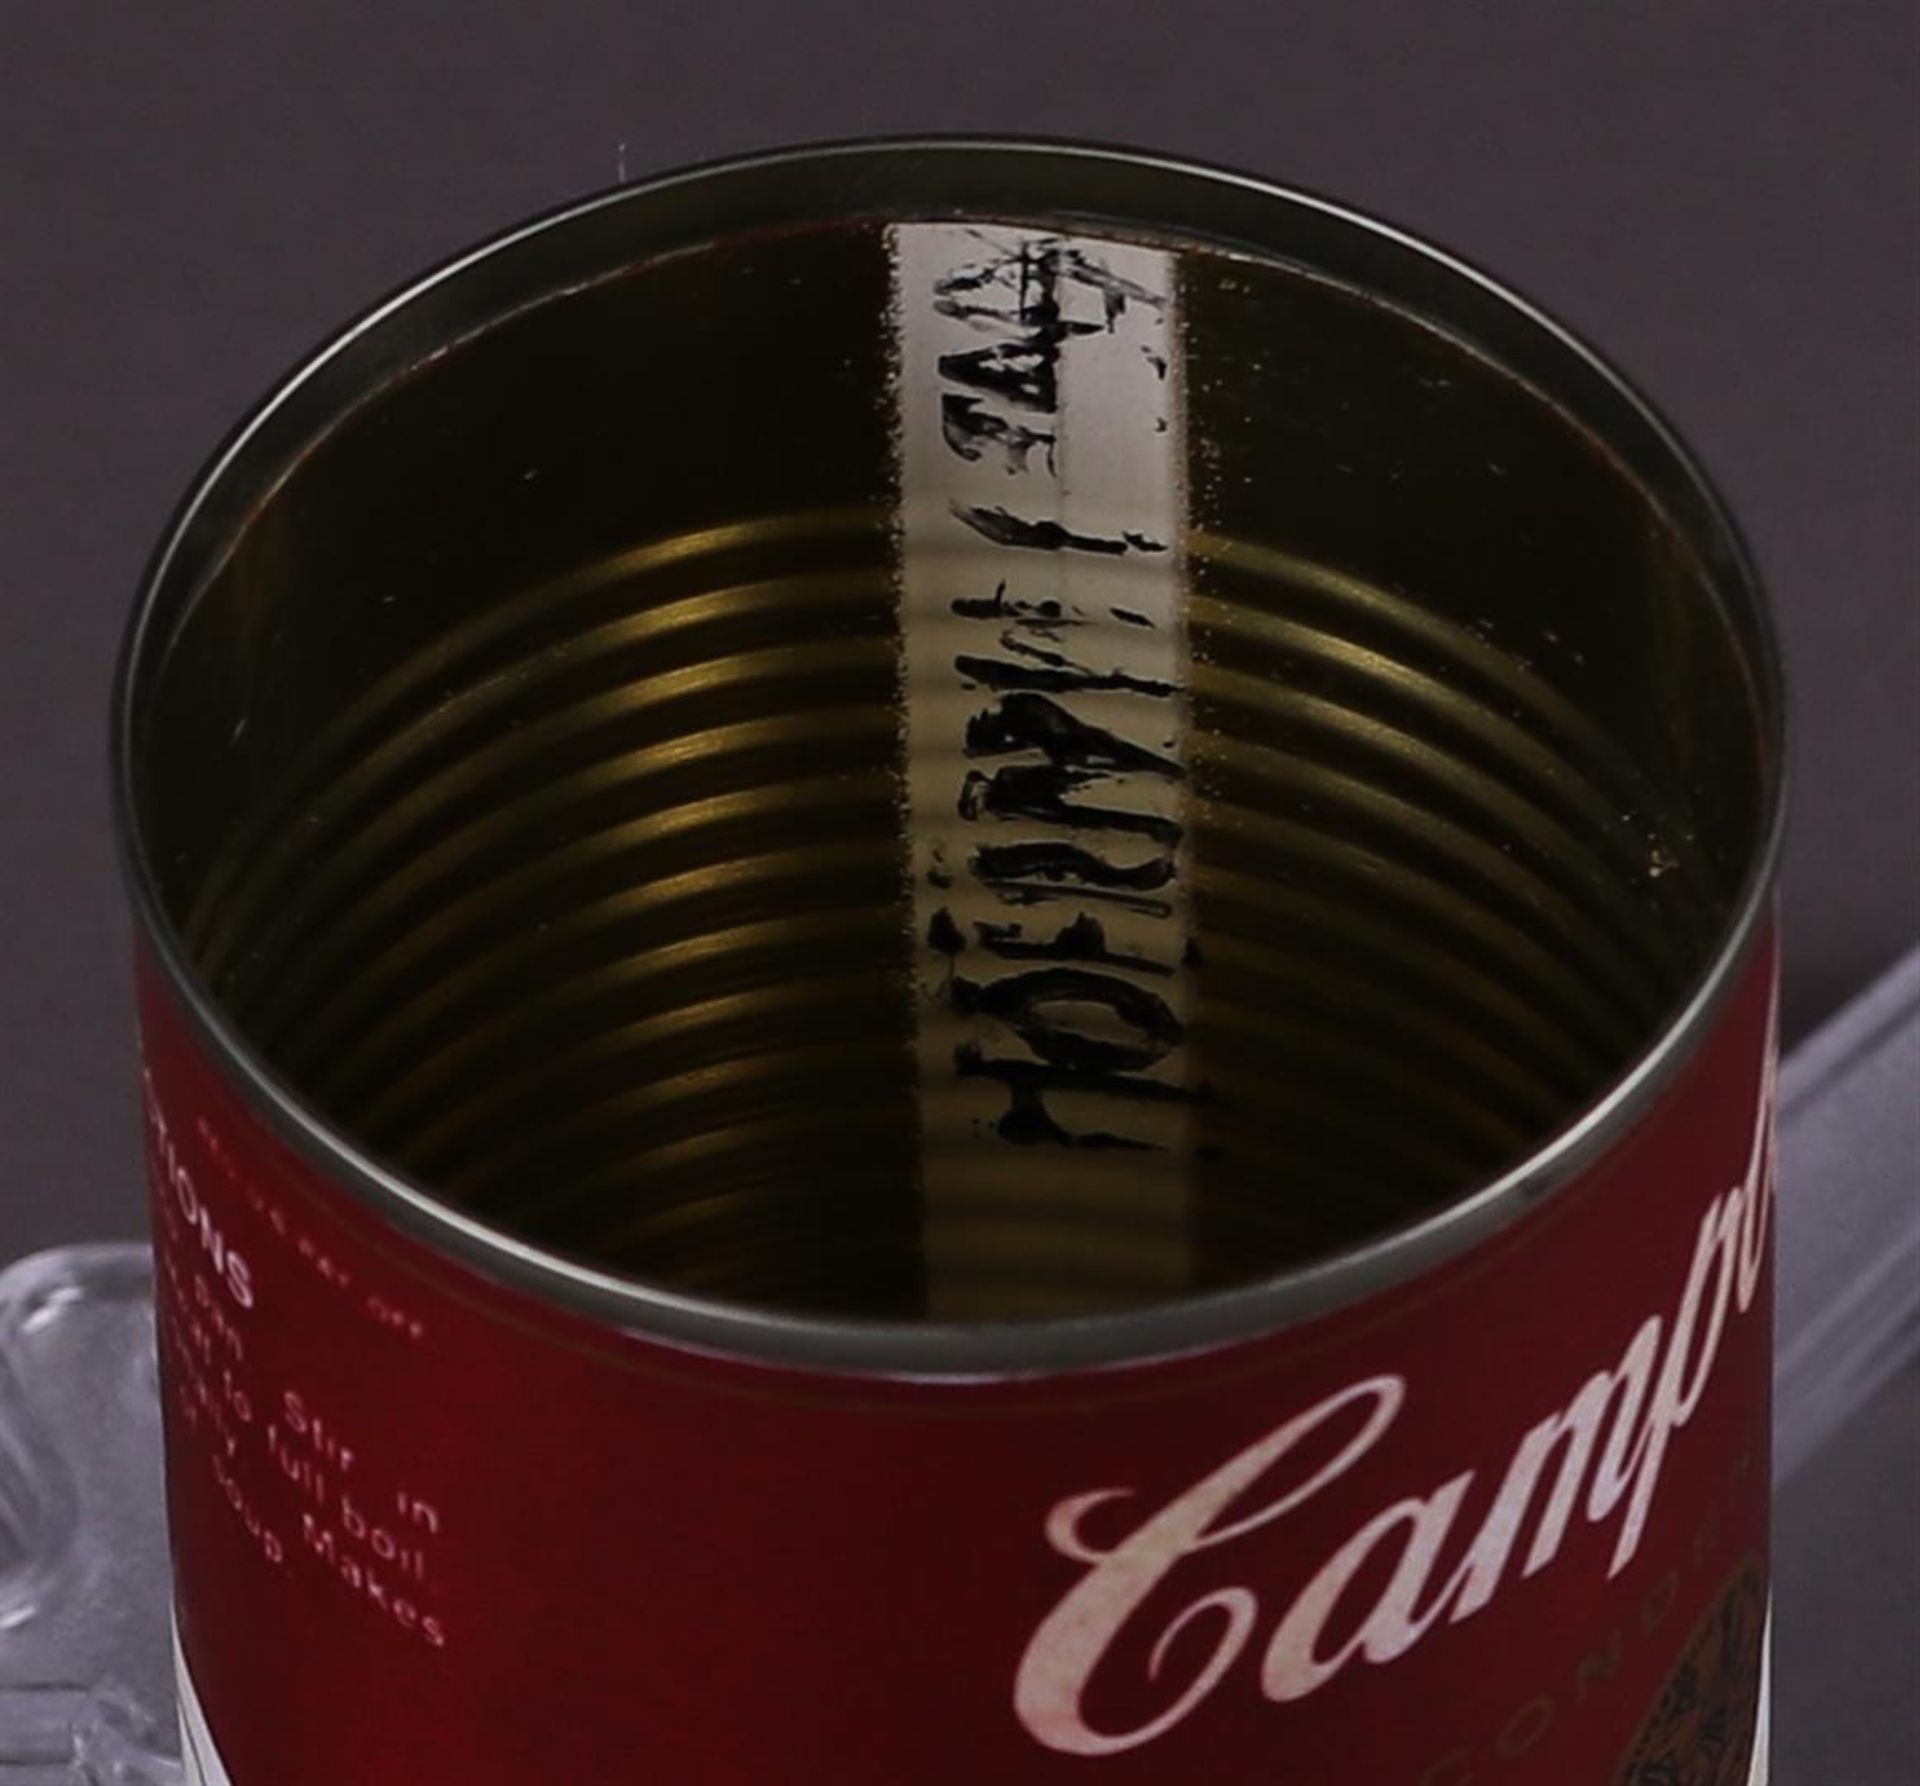 Andy Warhol (Pittsburgh, , 1928 - 1987New York ),(after), Campbell's Chicken Soup can - Image 7 of 7